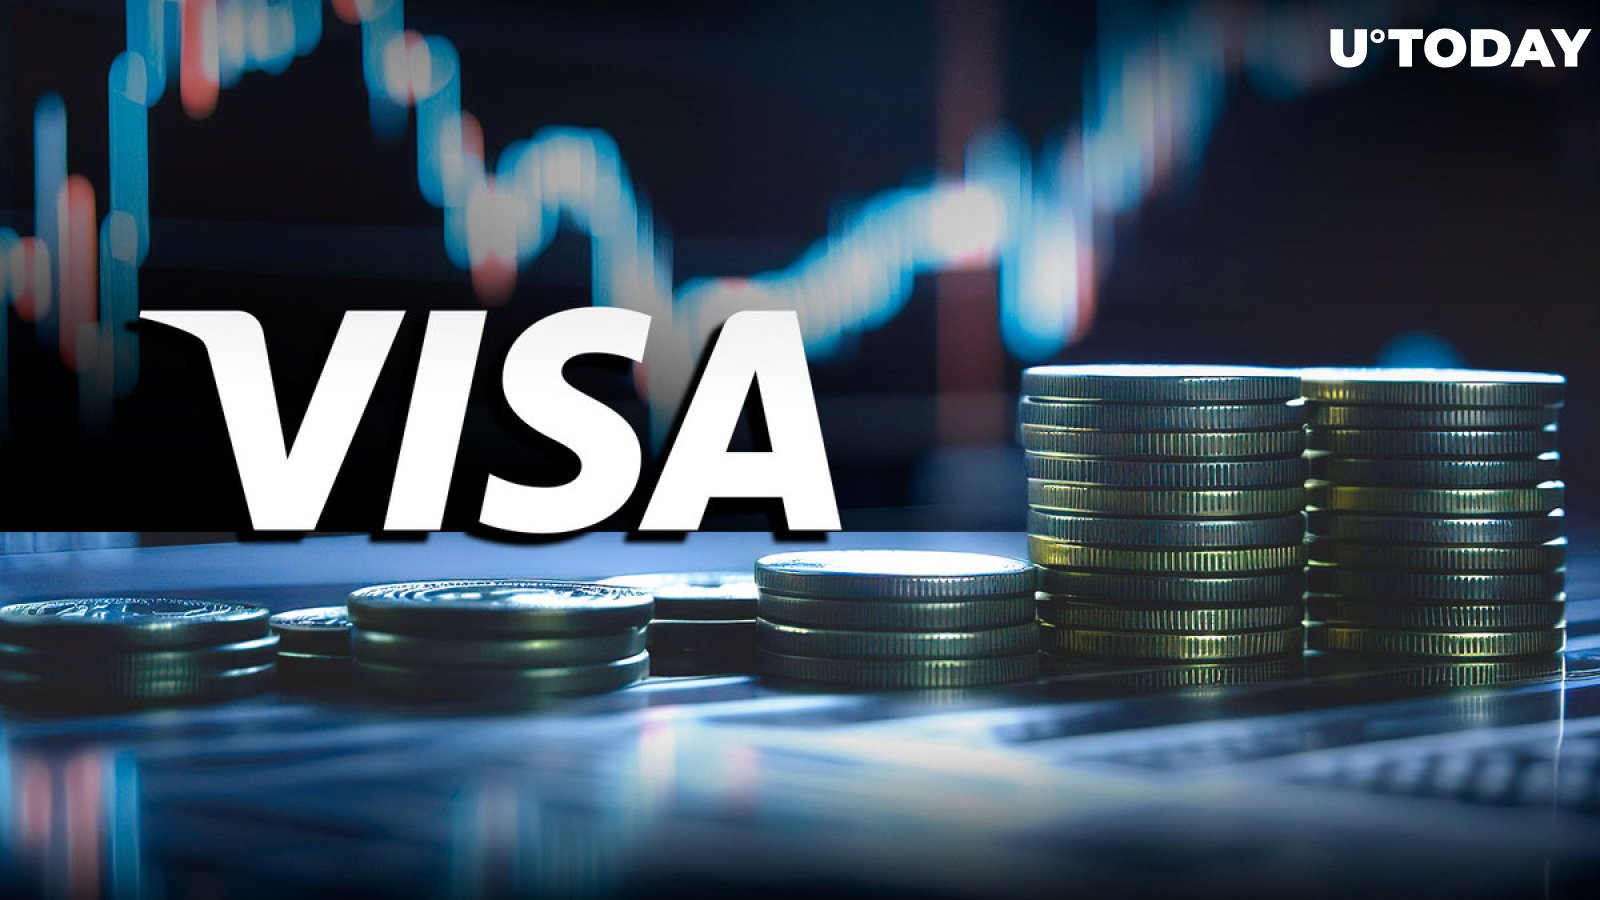 Stablecoins on Verge of Beating Visa in Volume: How Will It Affect Bitcoin?